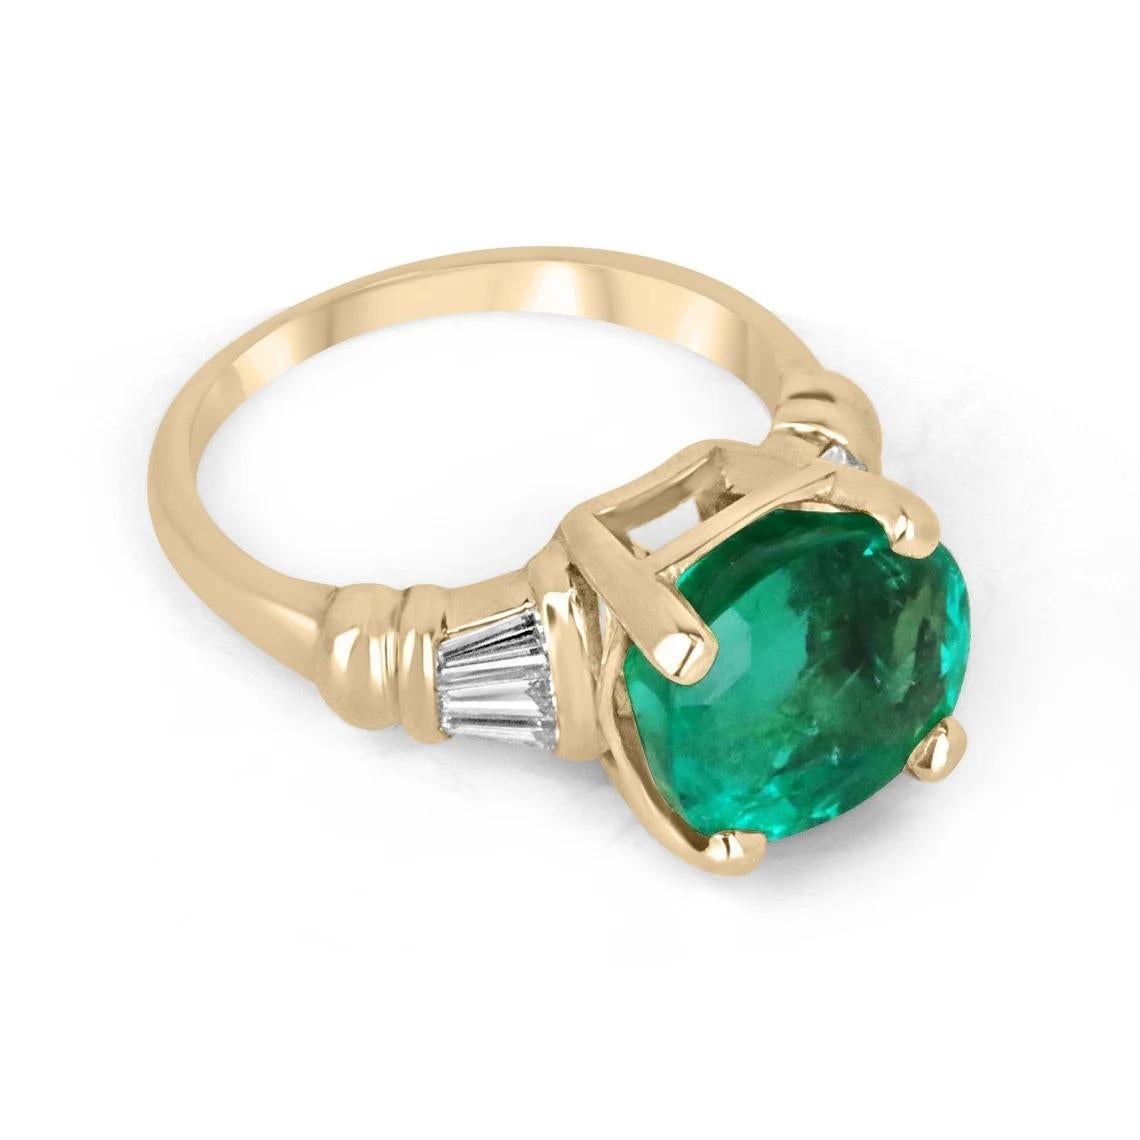 This engagement ring features a magnificent 4.98-carat cushion-cut Colombian emerald with a vivid electric green color that exudes remarkable clarity and luster. The emerald is set in a four-prong mount, positioned horizontally in an east-to-west